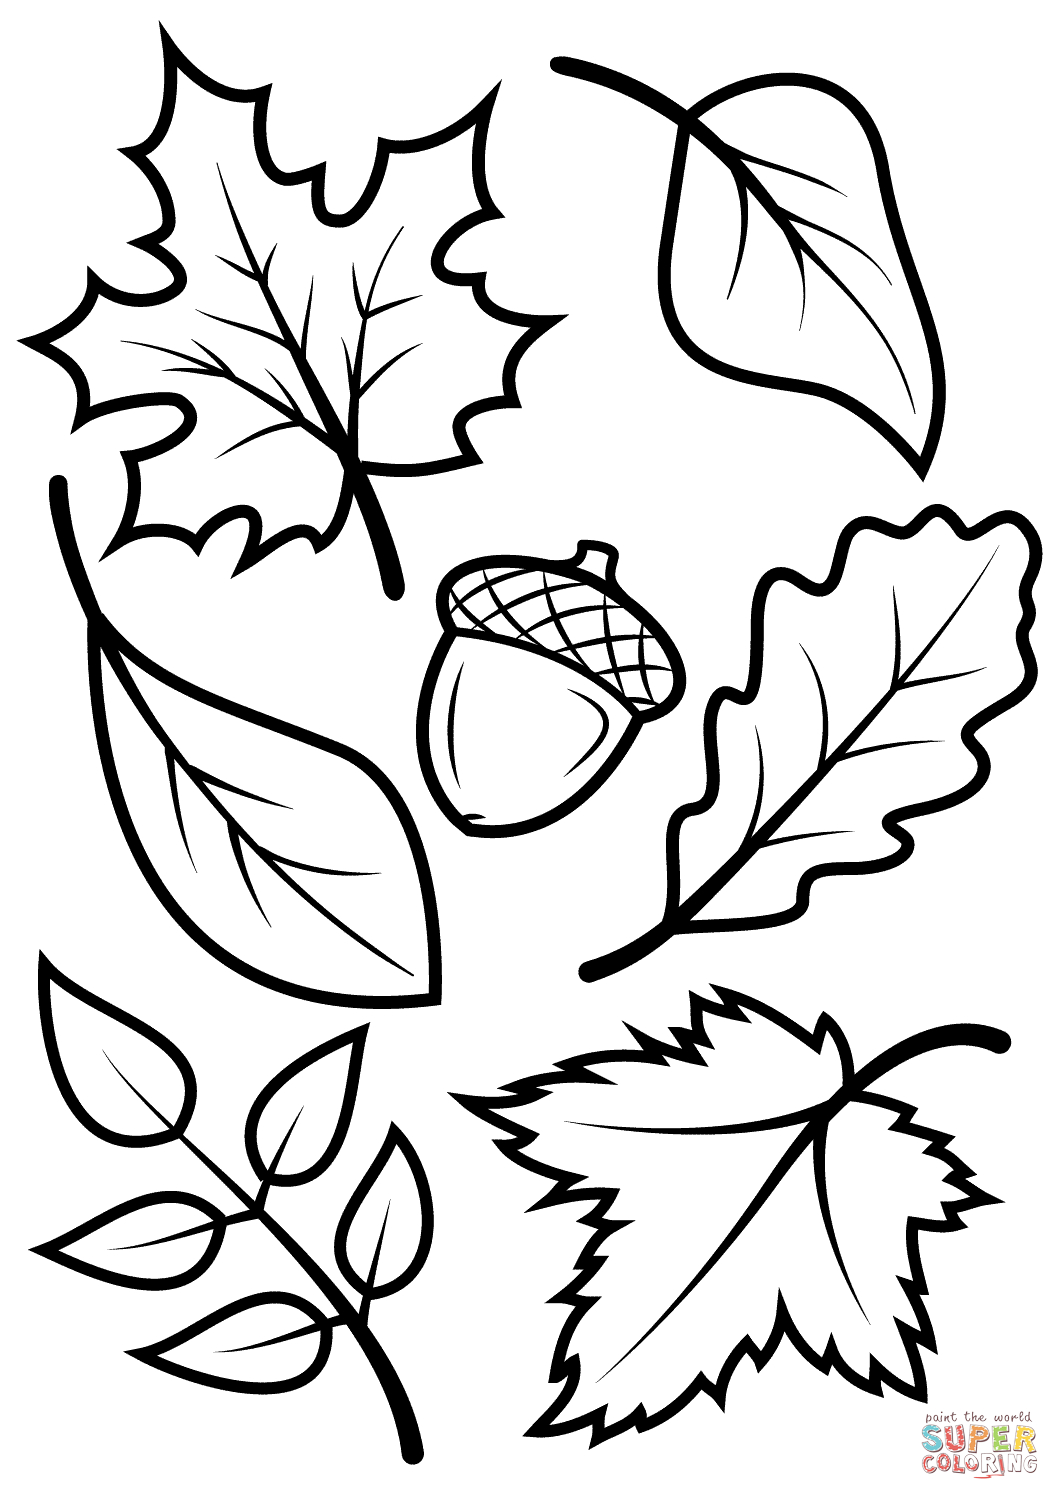 Fall Leaves And Acorn Coloring Page | Free Printable Coloring Pages - Free Fall Printable Coloring Sheets